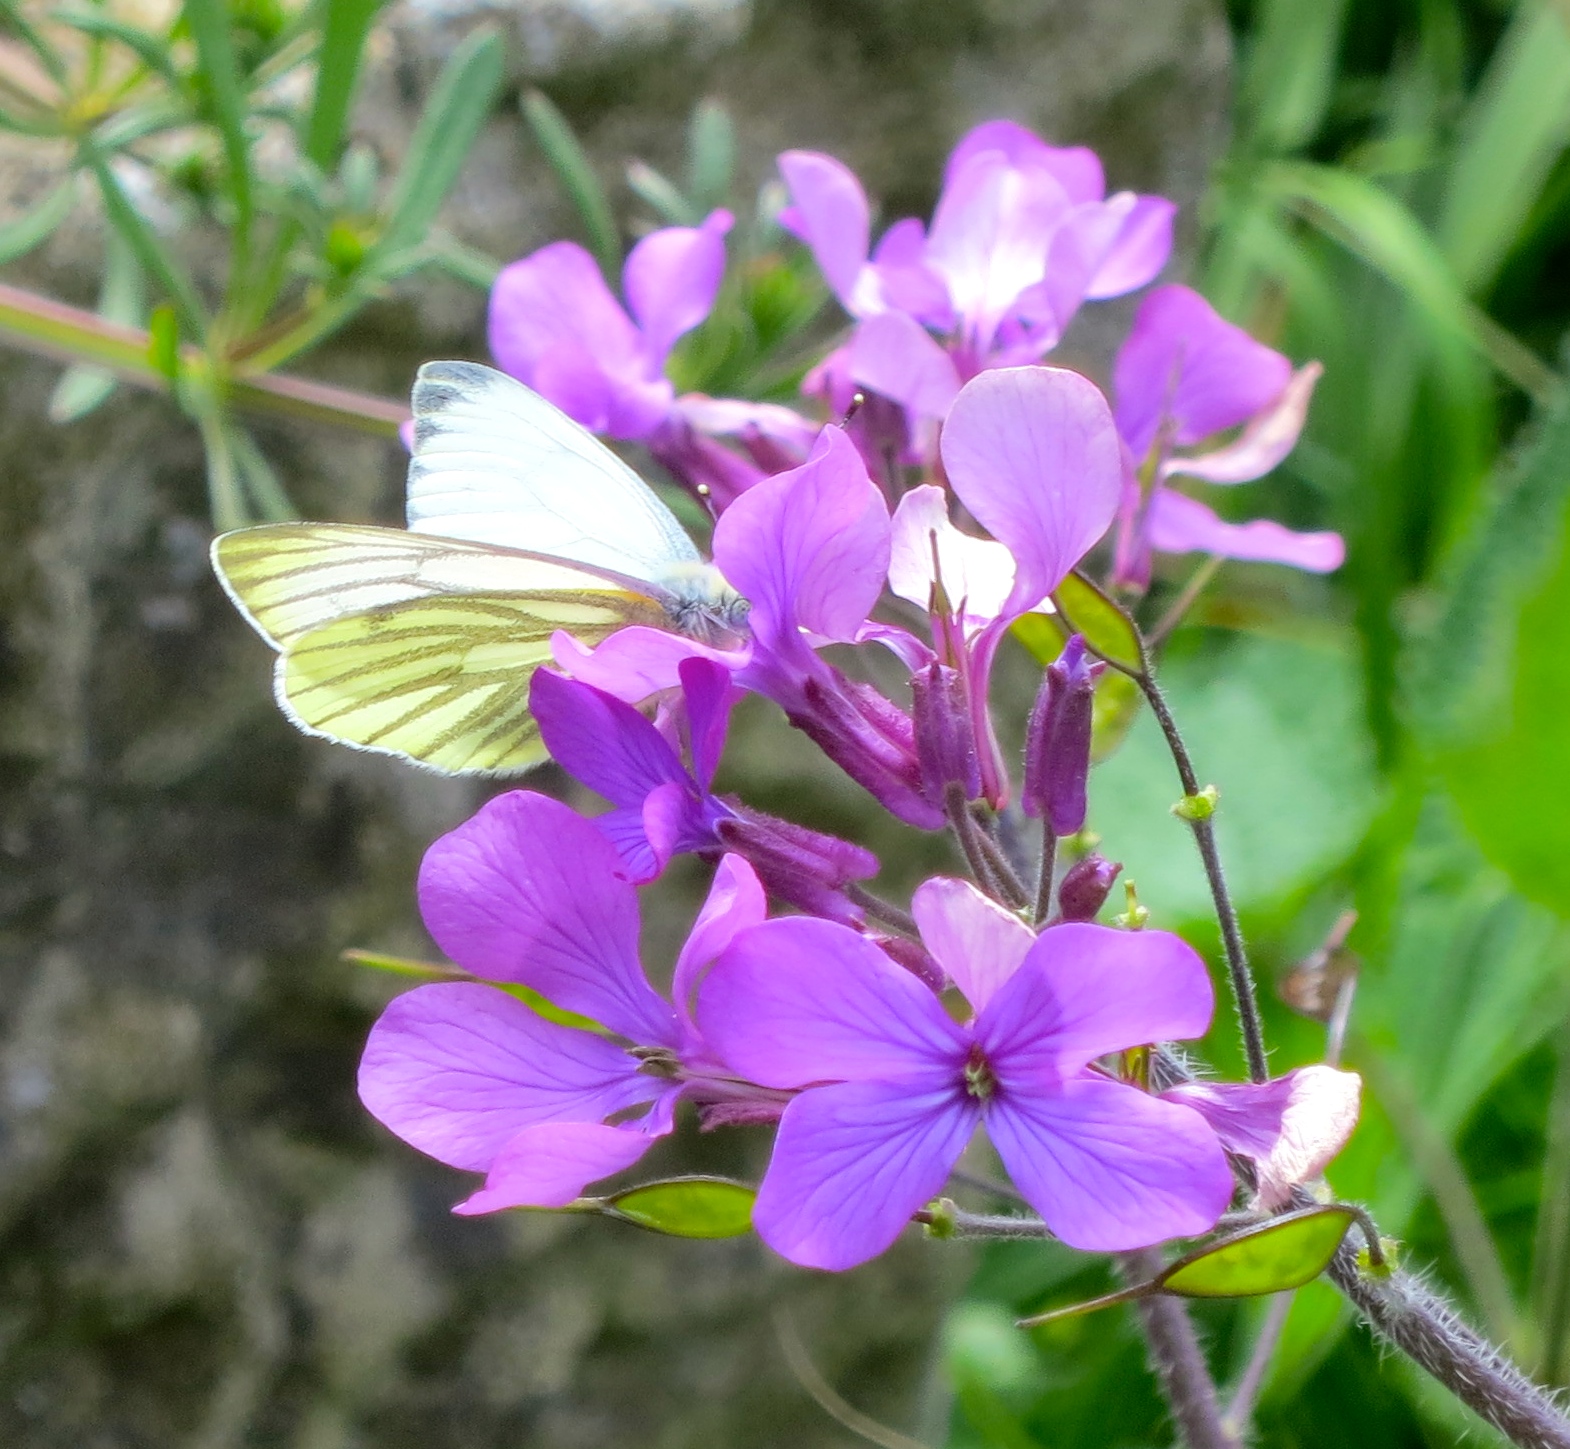 Cabbage white butterfly on honesty